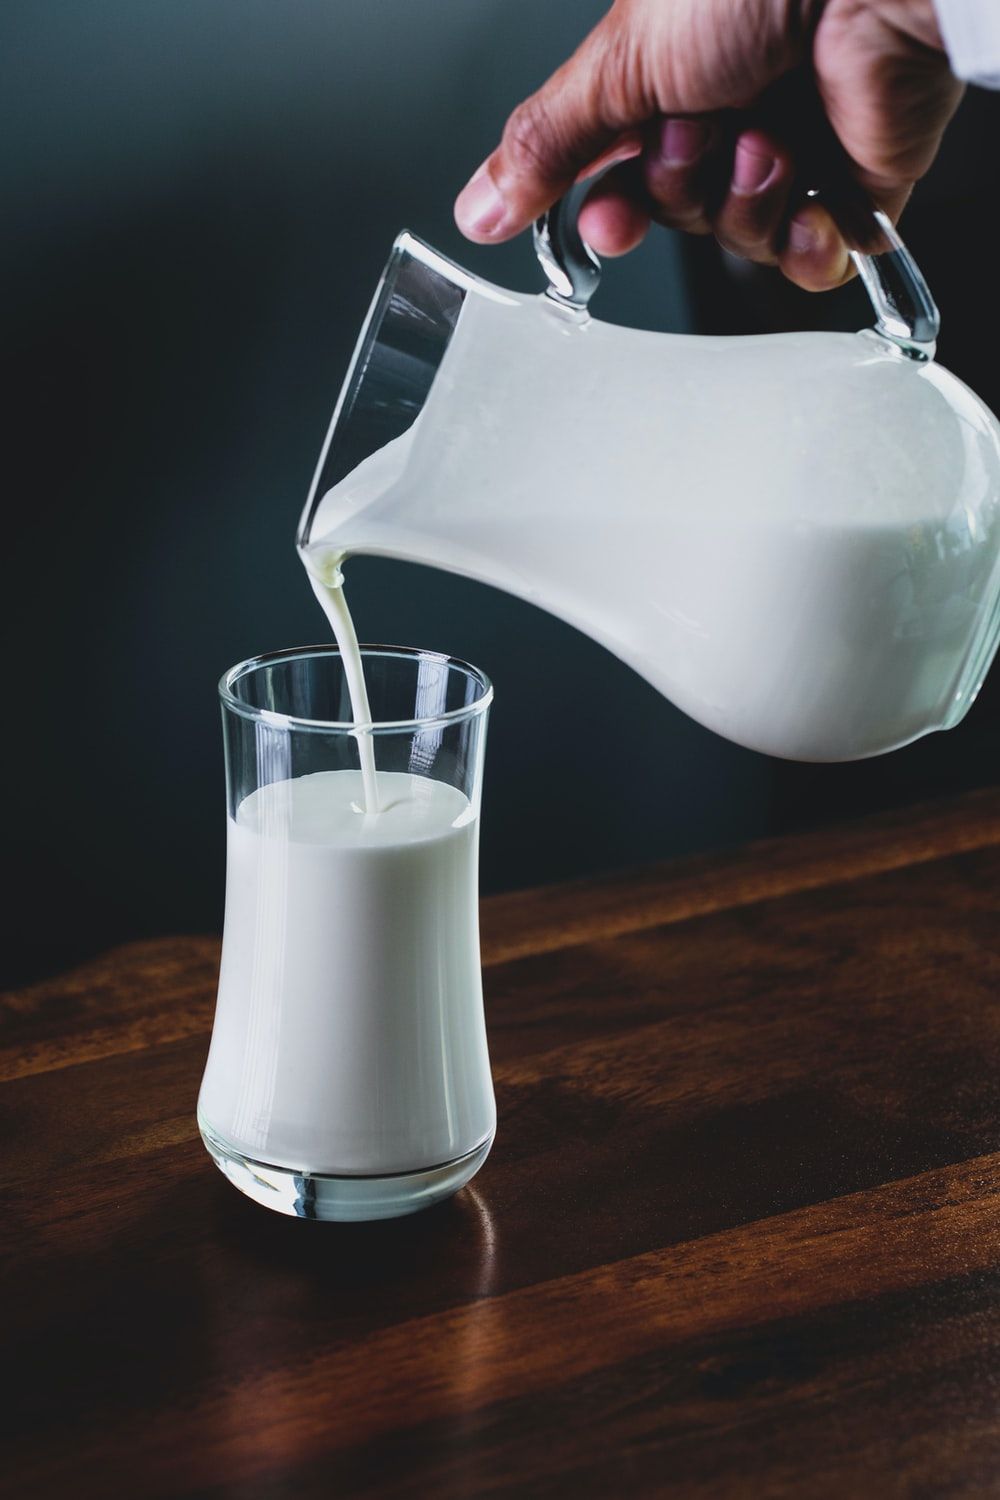 Dairy Picture. Download Free Image